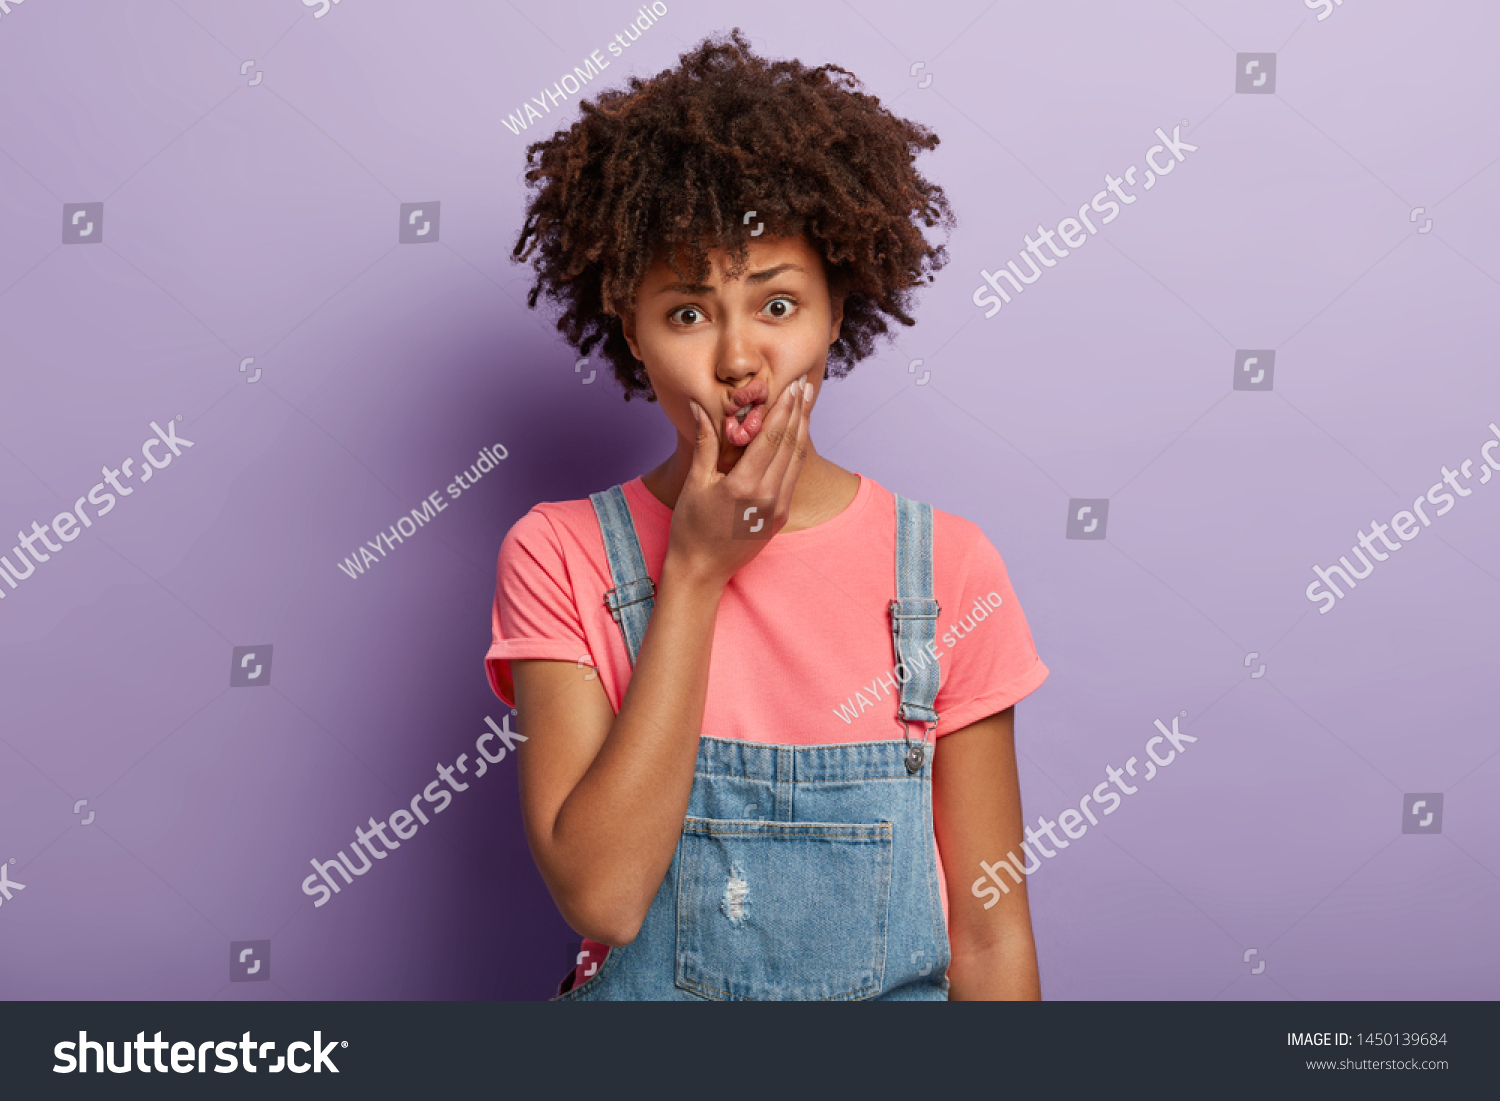 Discontent lovely lady presses lips with hand, makes grimace, has unhappy expression, thinks about something, dressed in stylish clothes, poses against purpe wall. Human facial expressions concept #1450139684